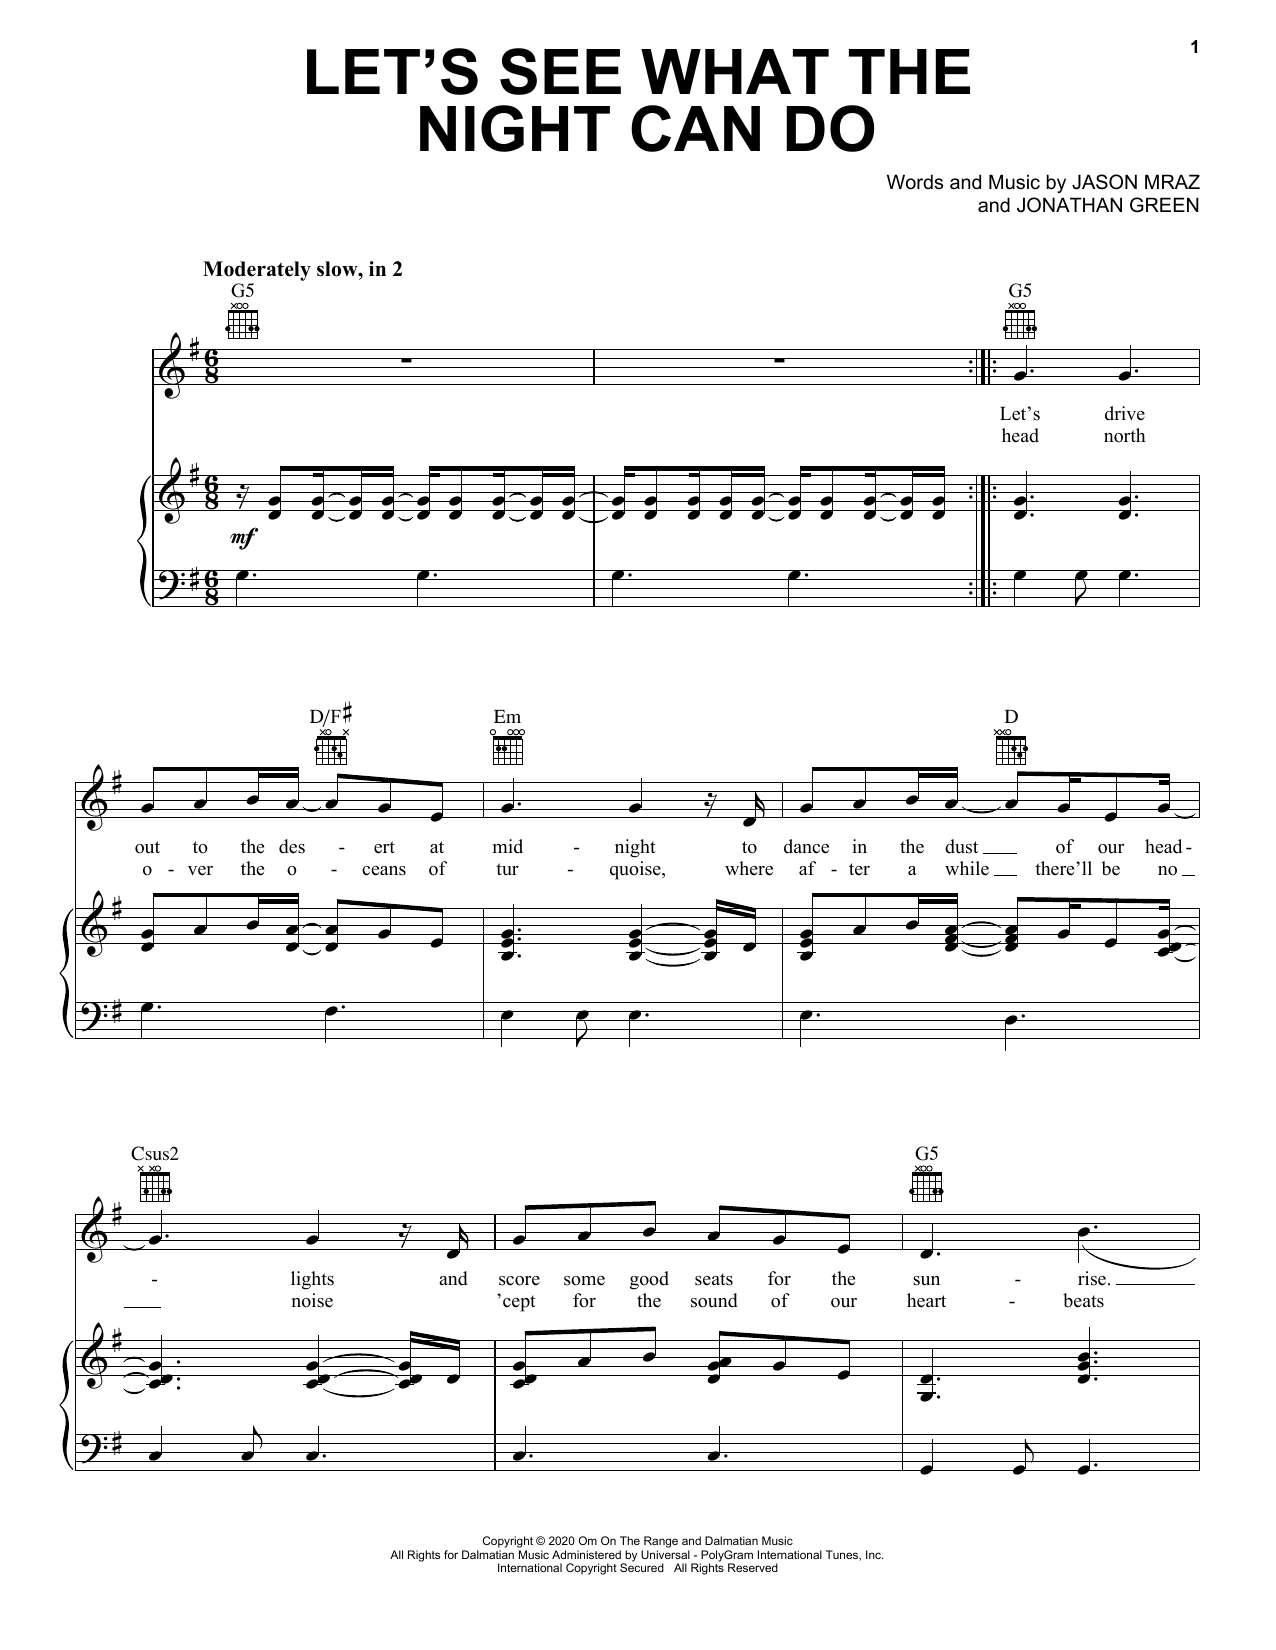 Download Jason Mraz Let's See What The Night Can Do Sheet Music